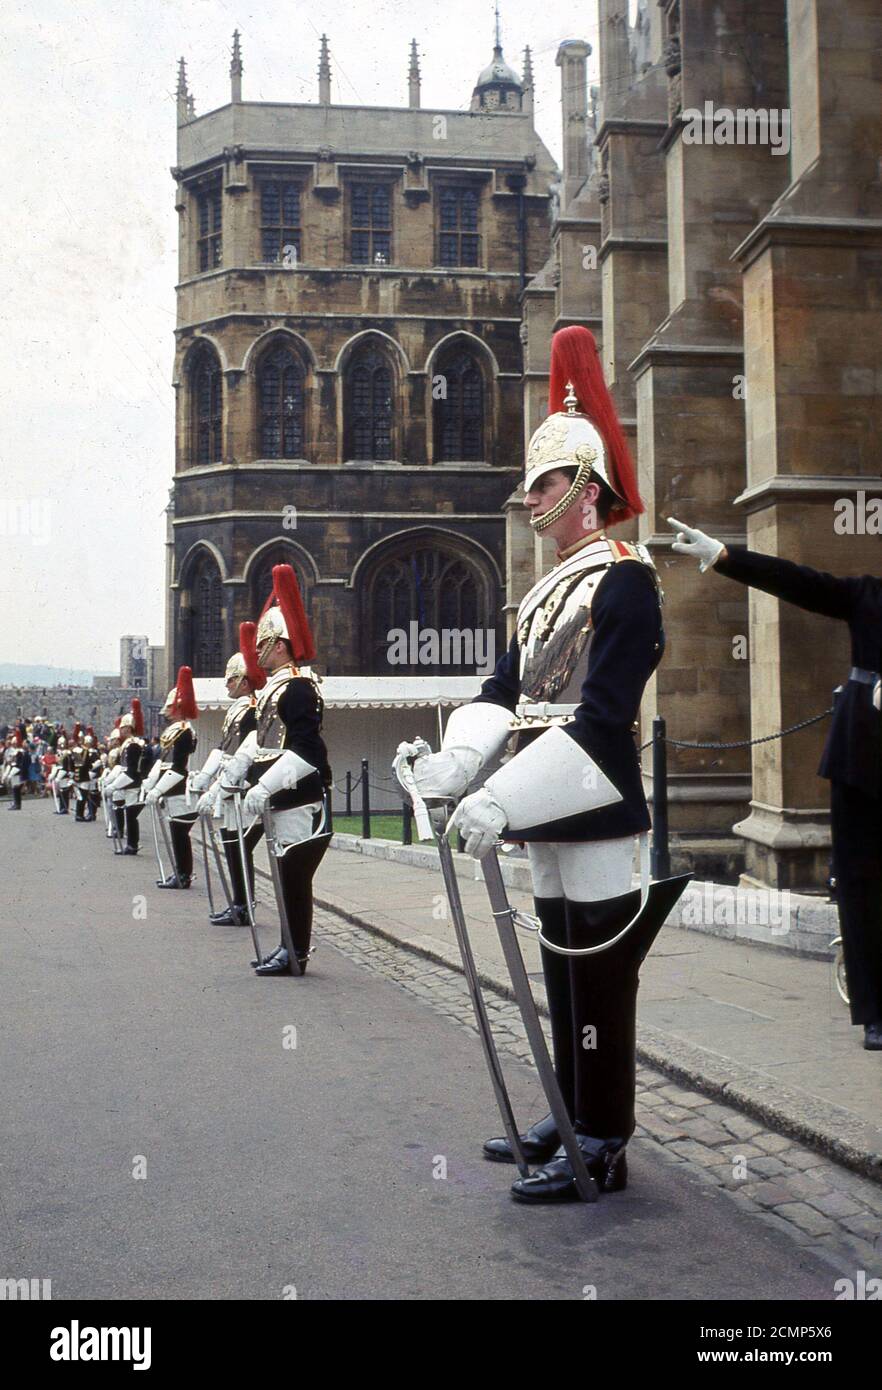 1960s, historical, Windsor Castle, a line-up of Queens Guards on ceremonial duty. Since 1660, the priviledge of guarding the Sovereign has belonged to the Household Troops or 'the Guards', which consists of five infantry regiments - The Grenadier, Coldsteam, Scots, Irish and Welsh Guards - and two regiments of the Household Cavalry - the Life Giards and the Blues and Royals. Stock Photo